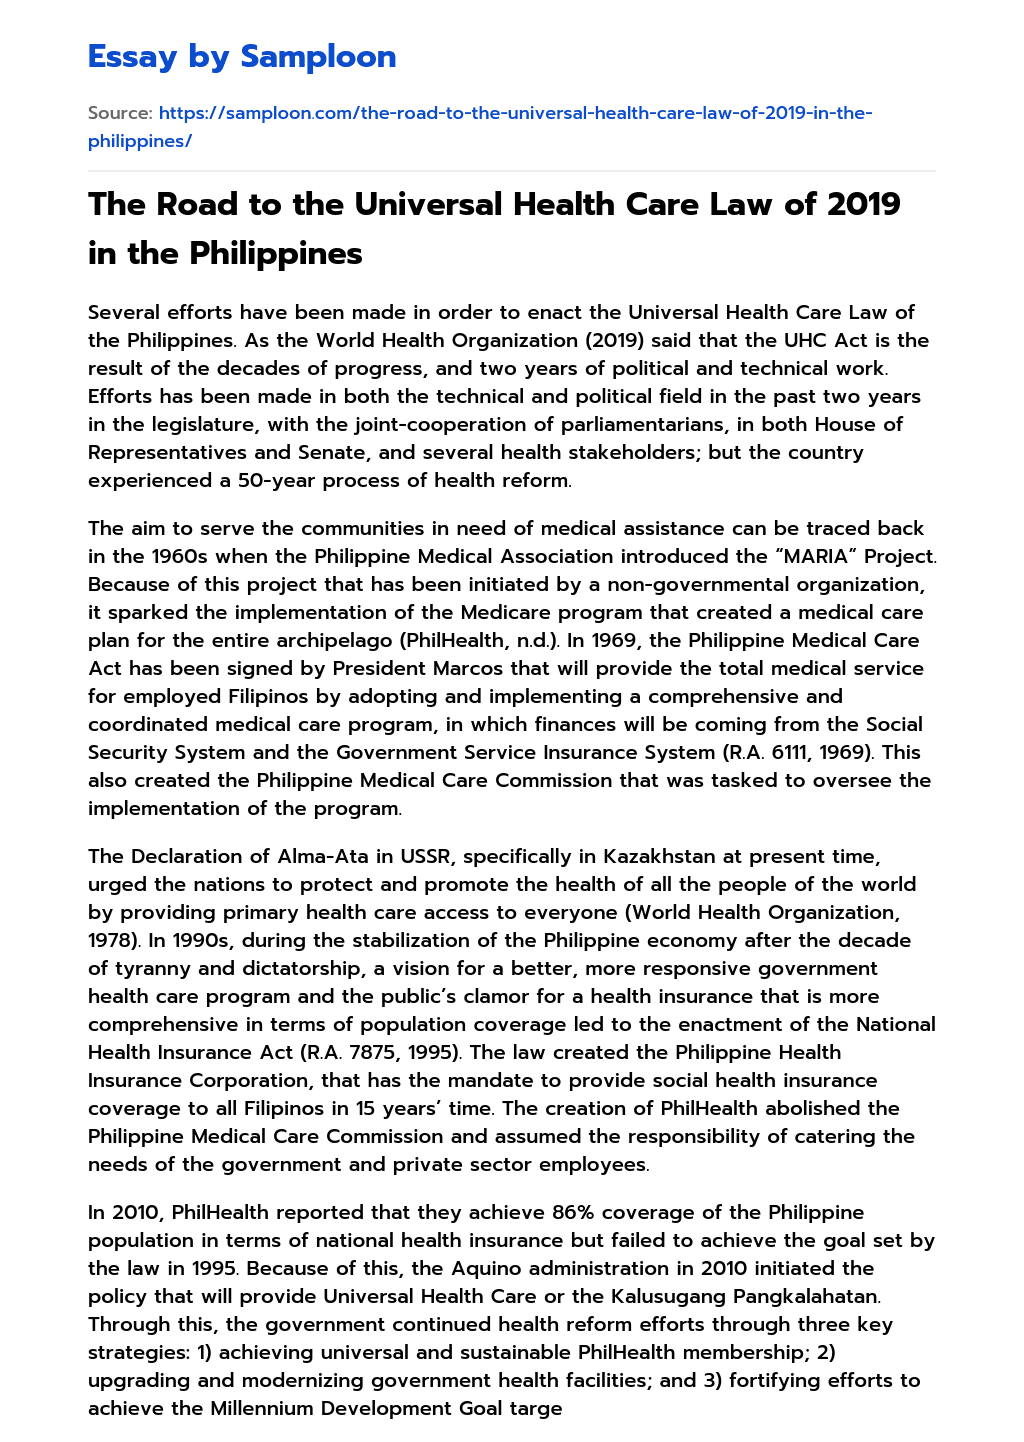 The Road to the Universal Health Care Law of 2019 in the Philippines essay